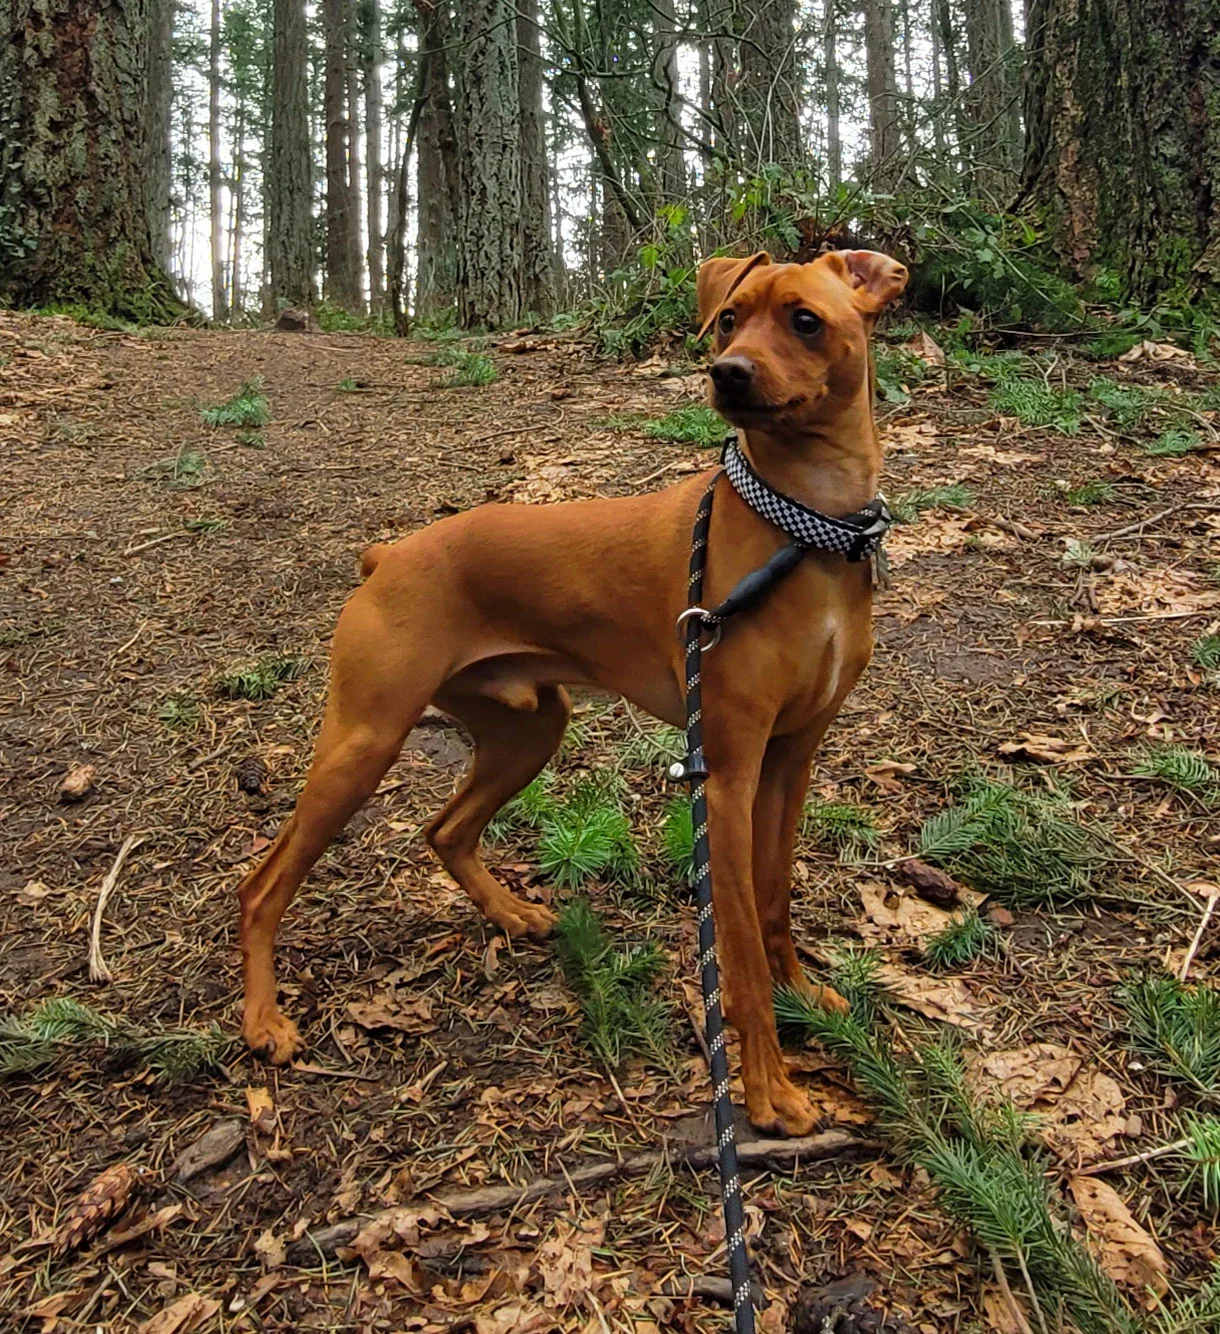 Short haired regal looking rust colored dog standing alert in forest scenery